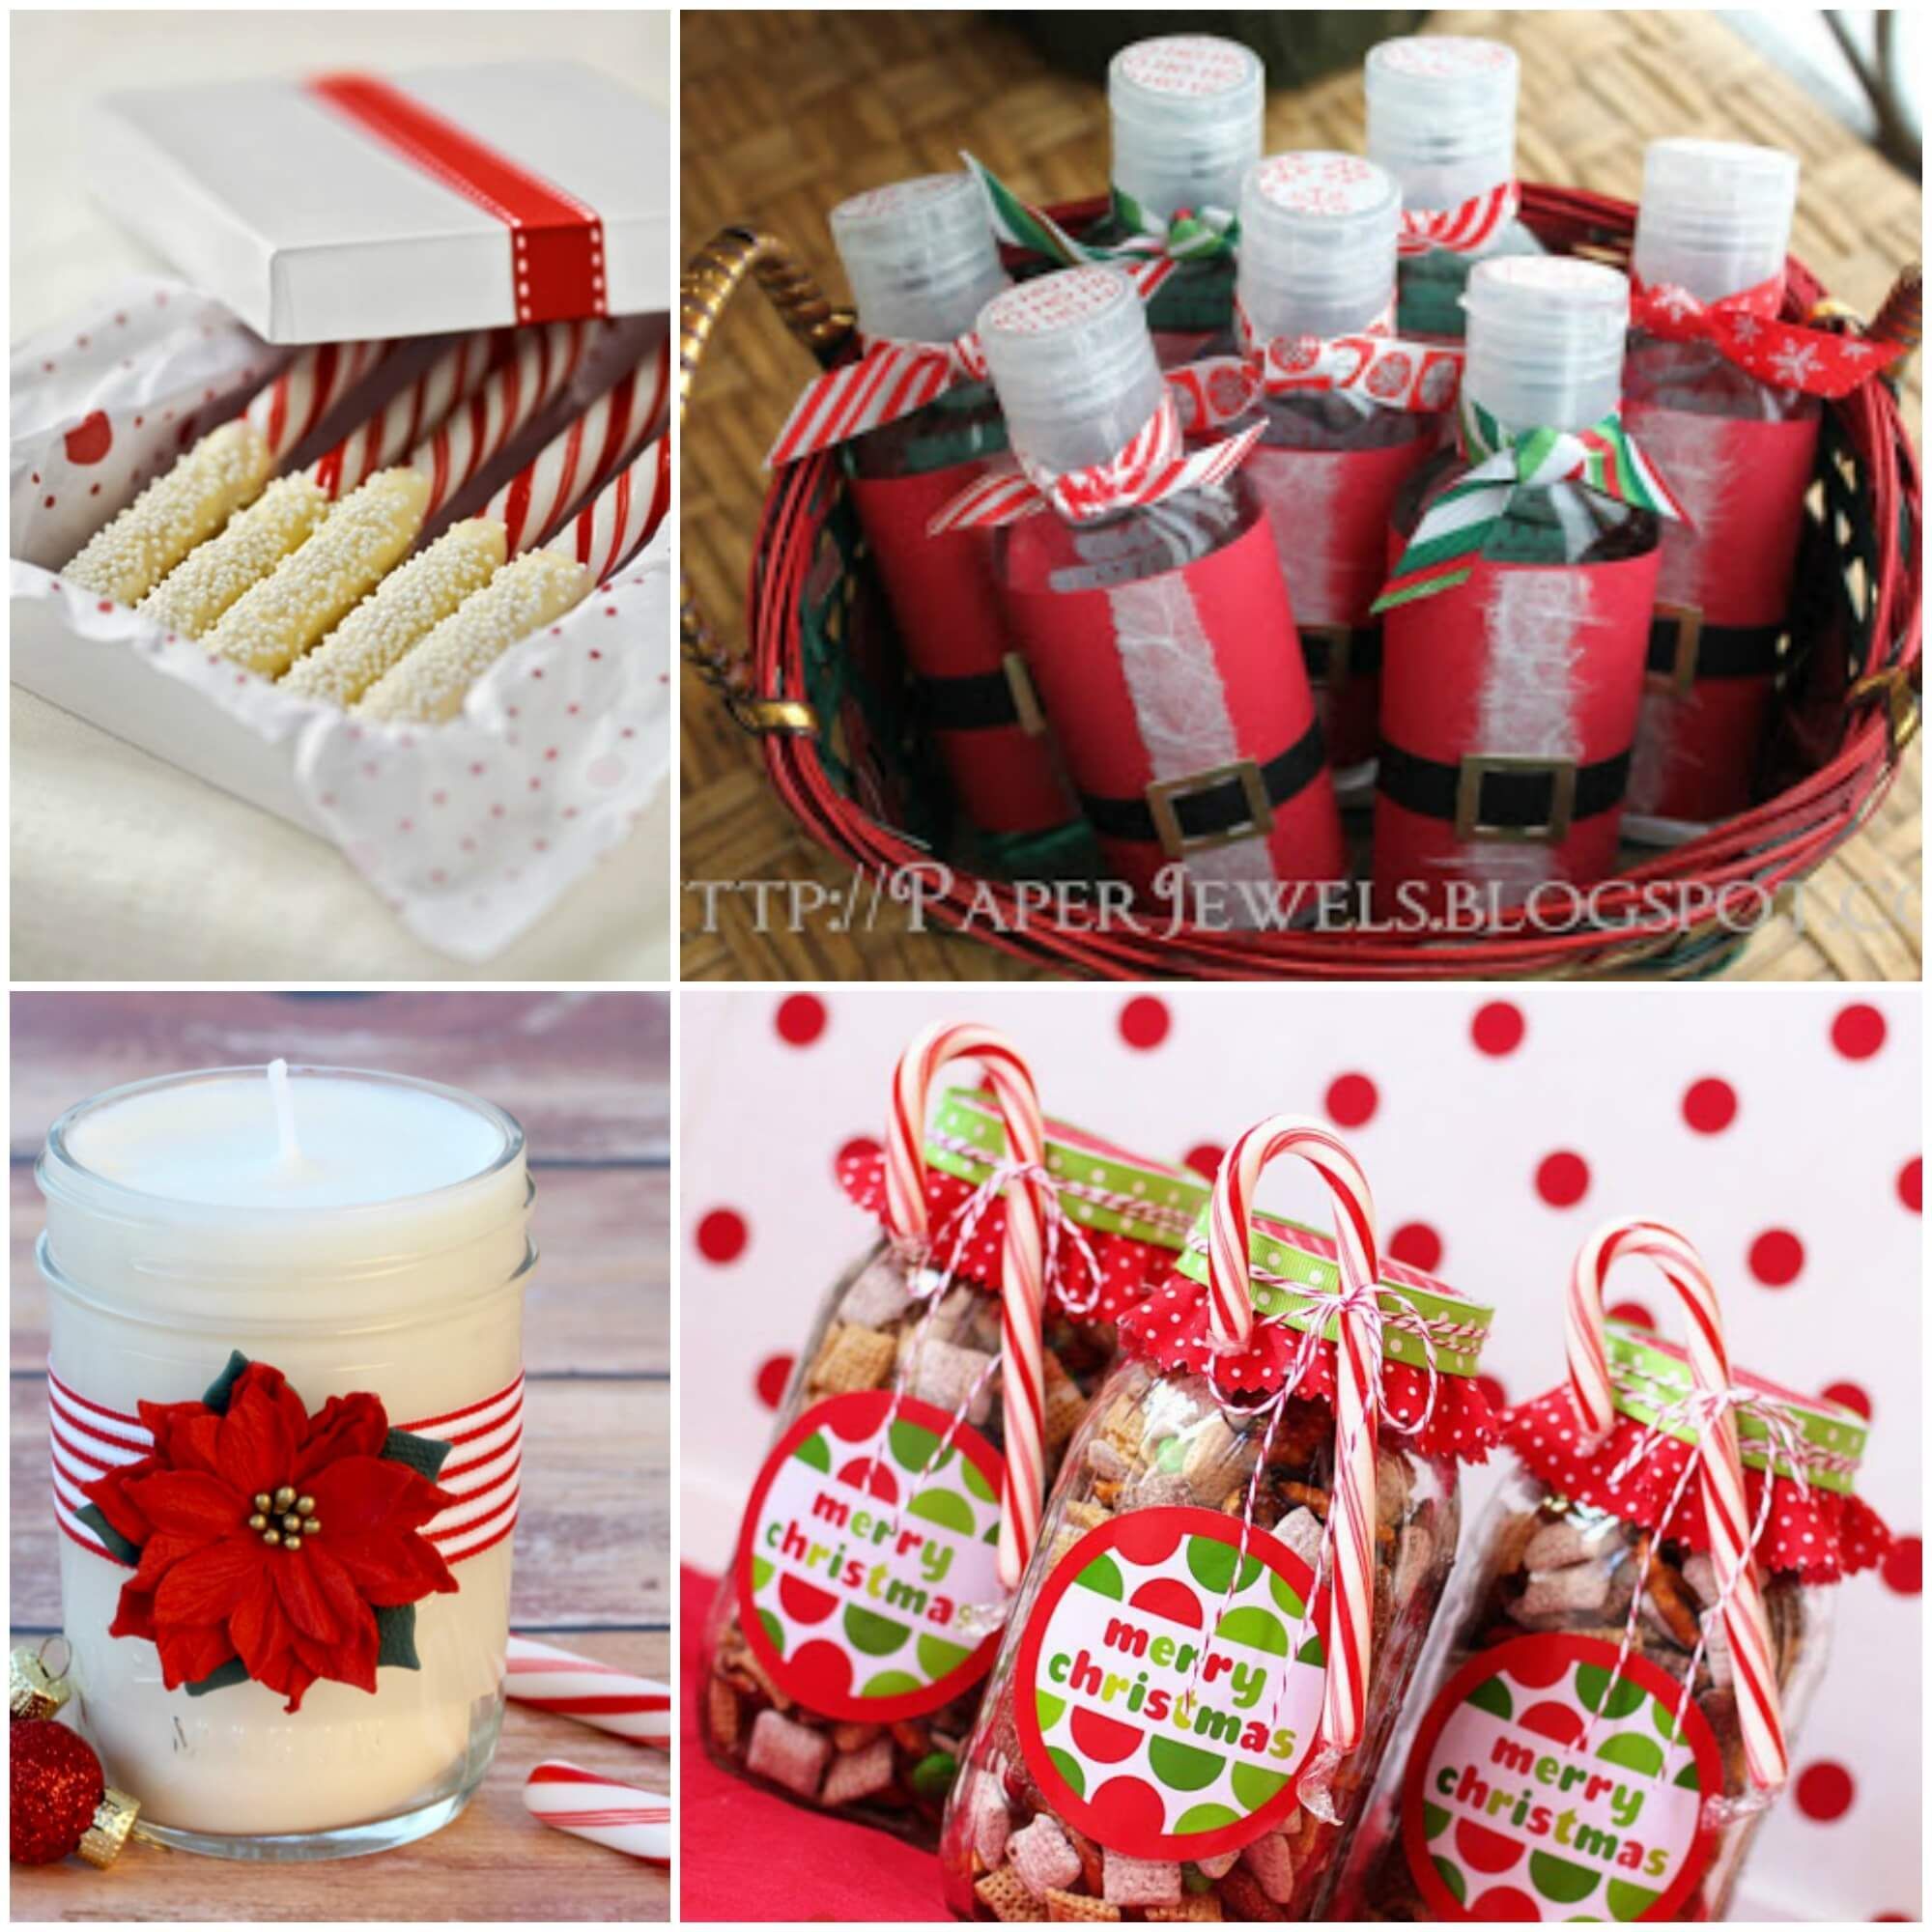 20 Inexpensive Christmas Gifts for CoWorkers & Friends -   19 xmas gifts for coworkers cheap ideas